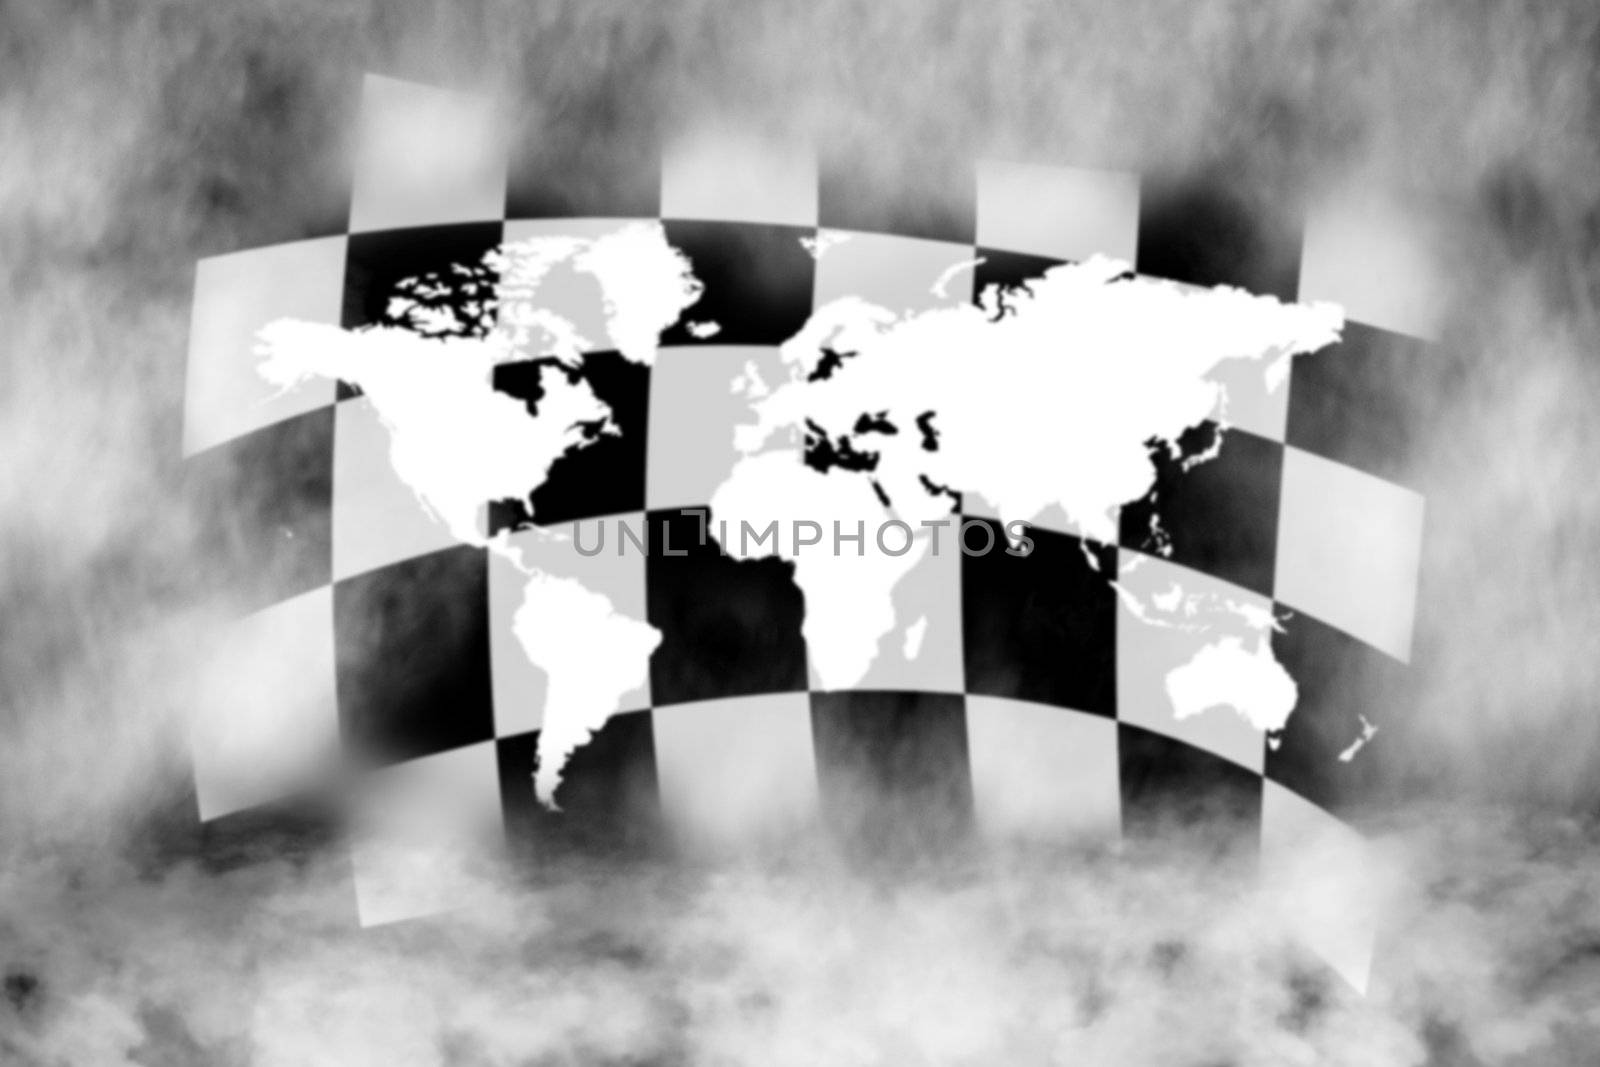 chechered race flag and world in the smoke